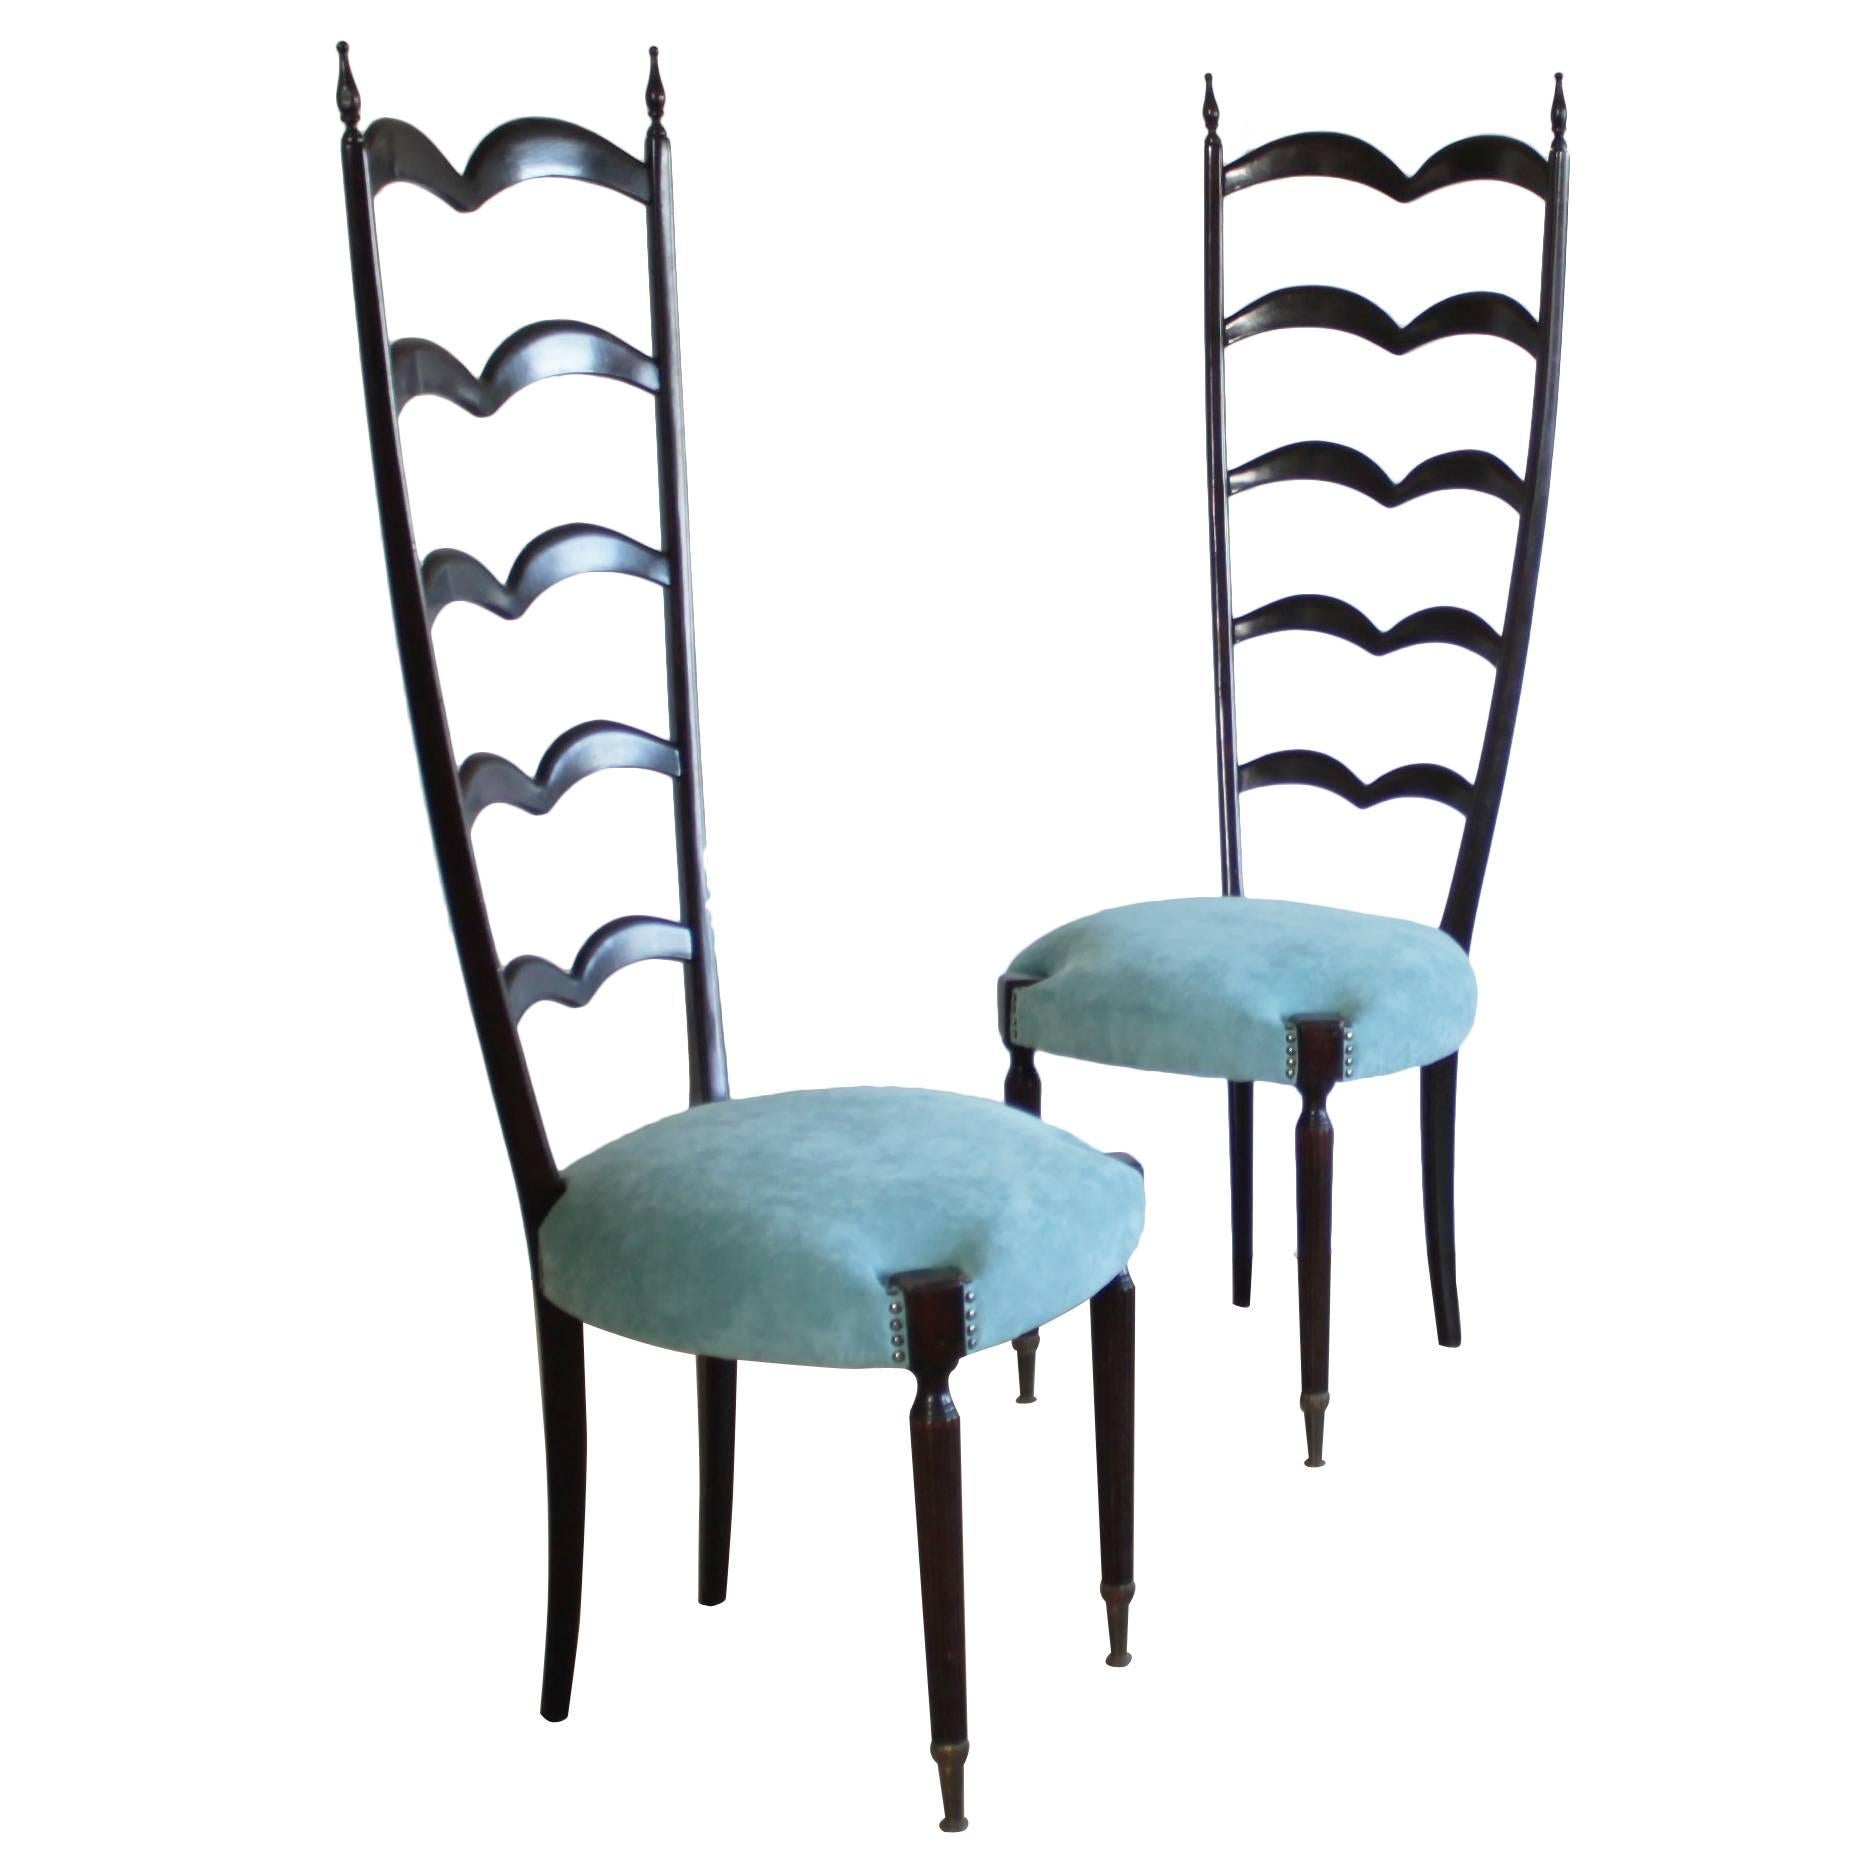 Pair of Highly Decorative Ladder Back Chairs by Paolo Buffa For Sale